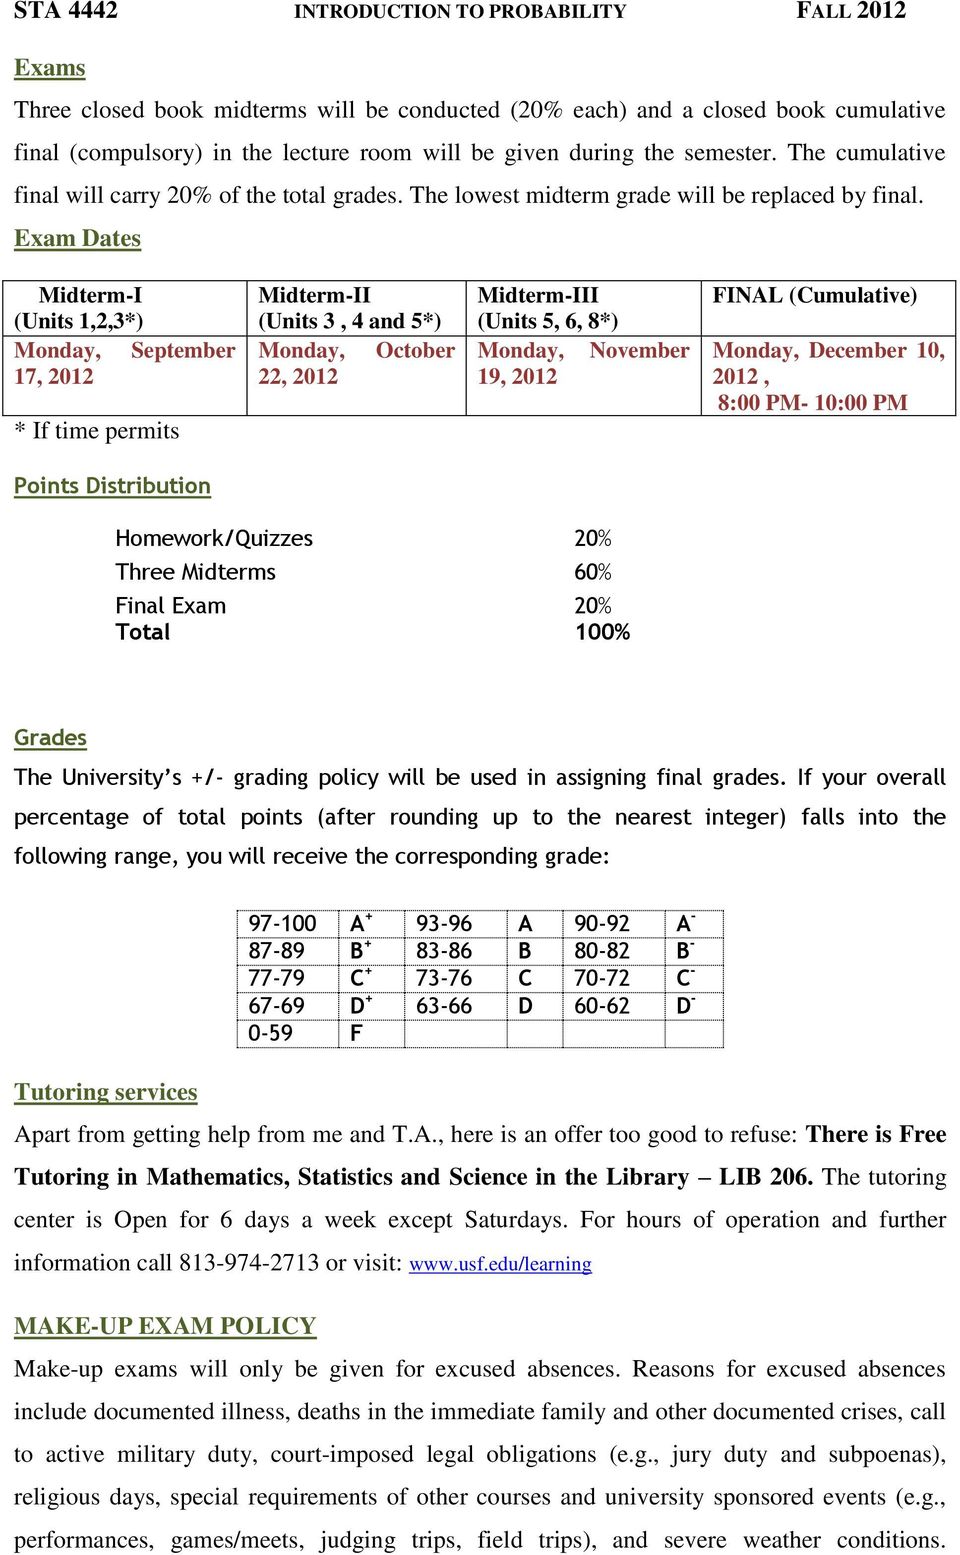 Exam Dates Midterm-I (Units 1,2,3*) Monday, September 17, 2012 * If time permits Midterm-II (Units 3, 4 and 5*) Monday, October 22, 2012 Midterm-III (Units 5, 6, 8*) Monday, November 19, 2012 FINAL